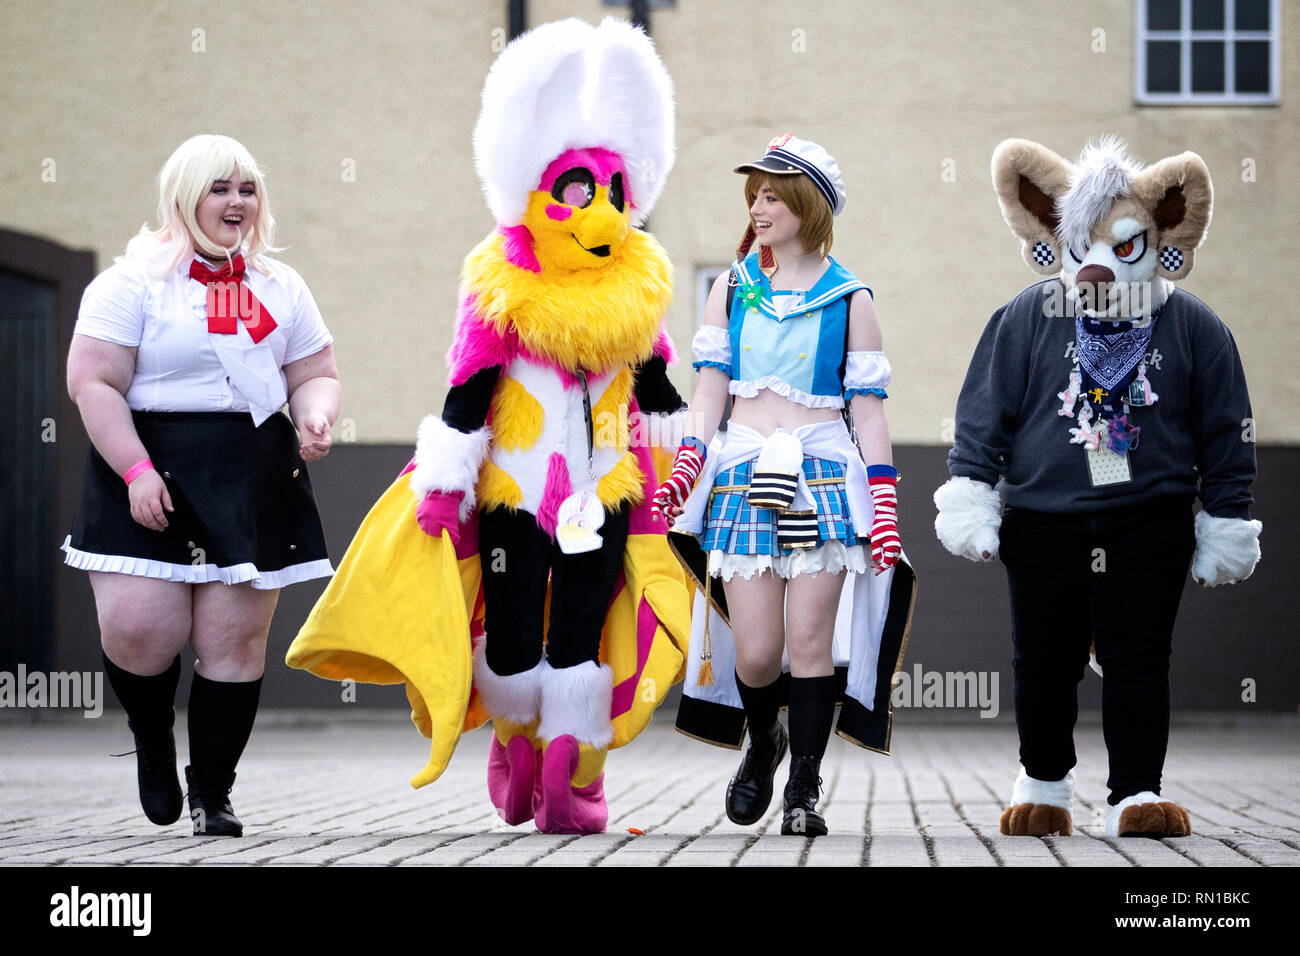 (Left to right) Madison Birrall, Penny Moth, Elise Forrest and Mitch Houston get into character as they arrive for the 2019 Capital Sci-Fi Con at the Corn Exchange in Edinburgh. Proceeds from the event are donated to the CHAS (Children's Hospices Across Scotland) charity. Stock Photo